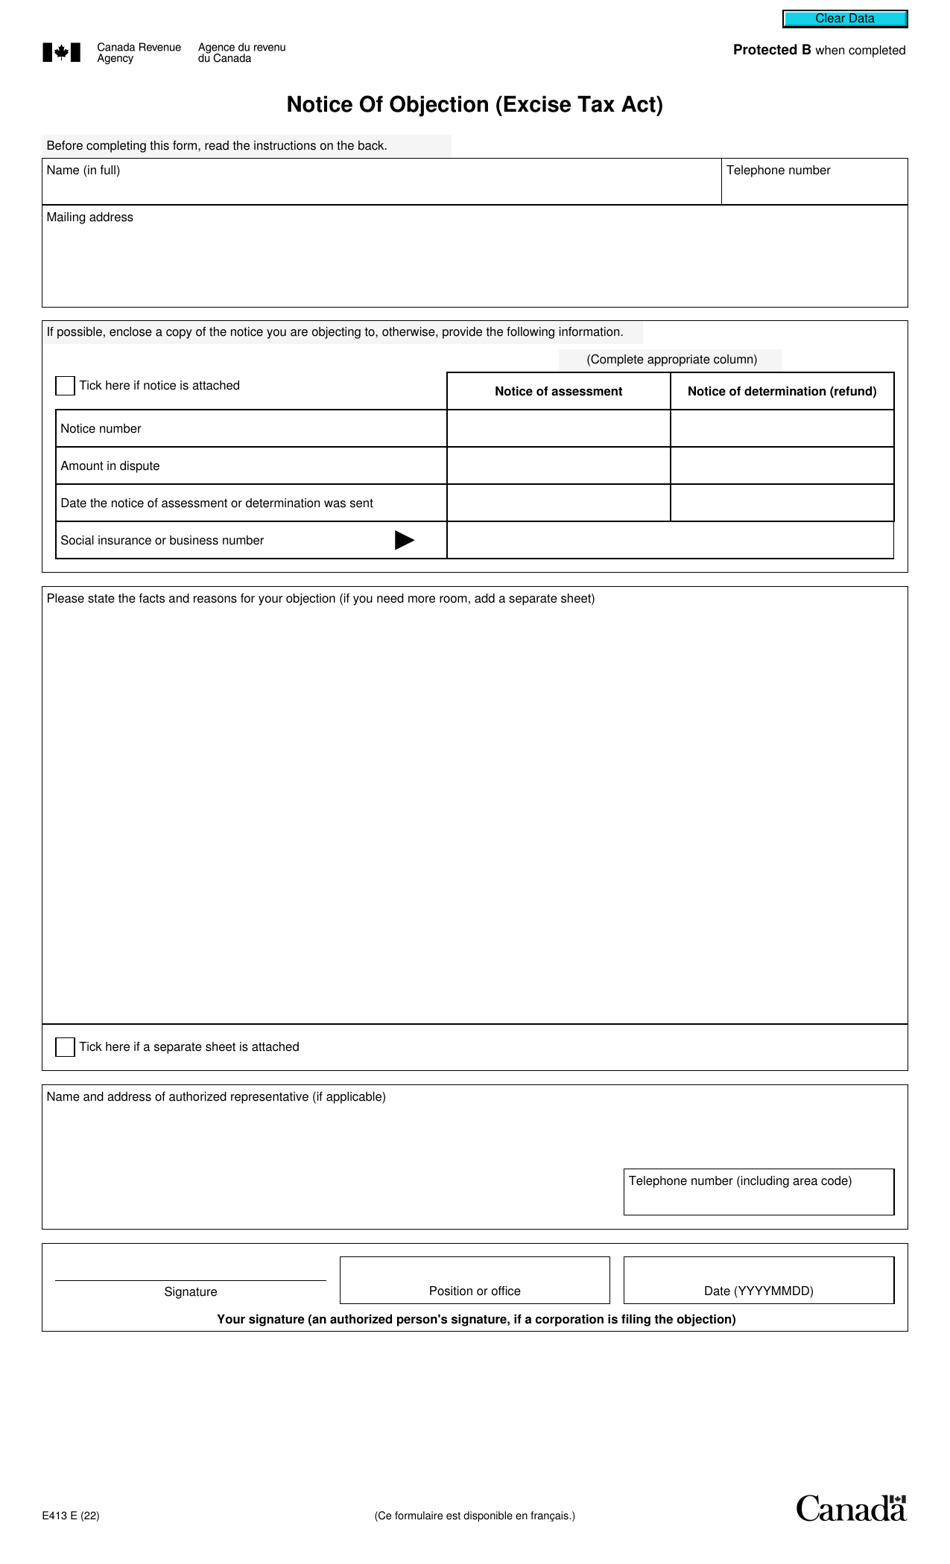 Form E413 Notice of Objection (Excise Tax Act) - Canada, Page 1